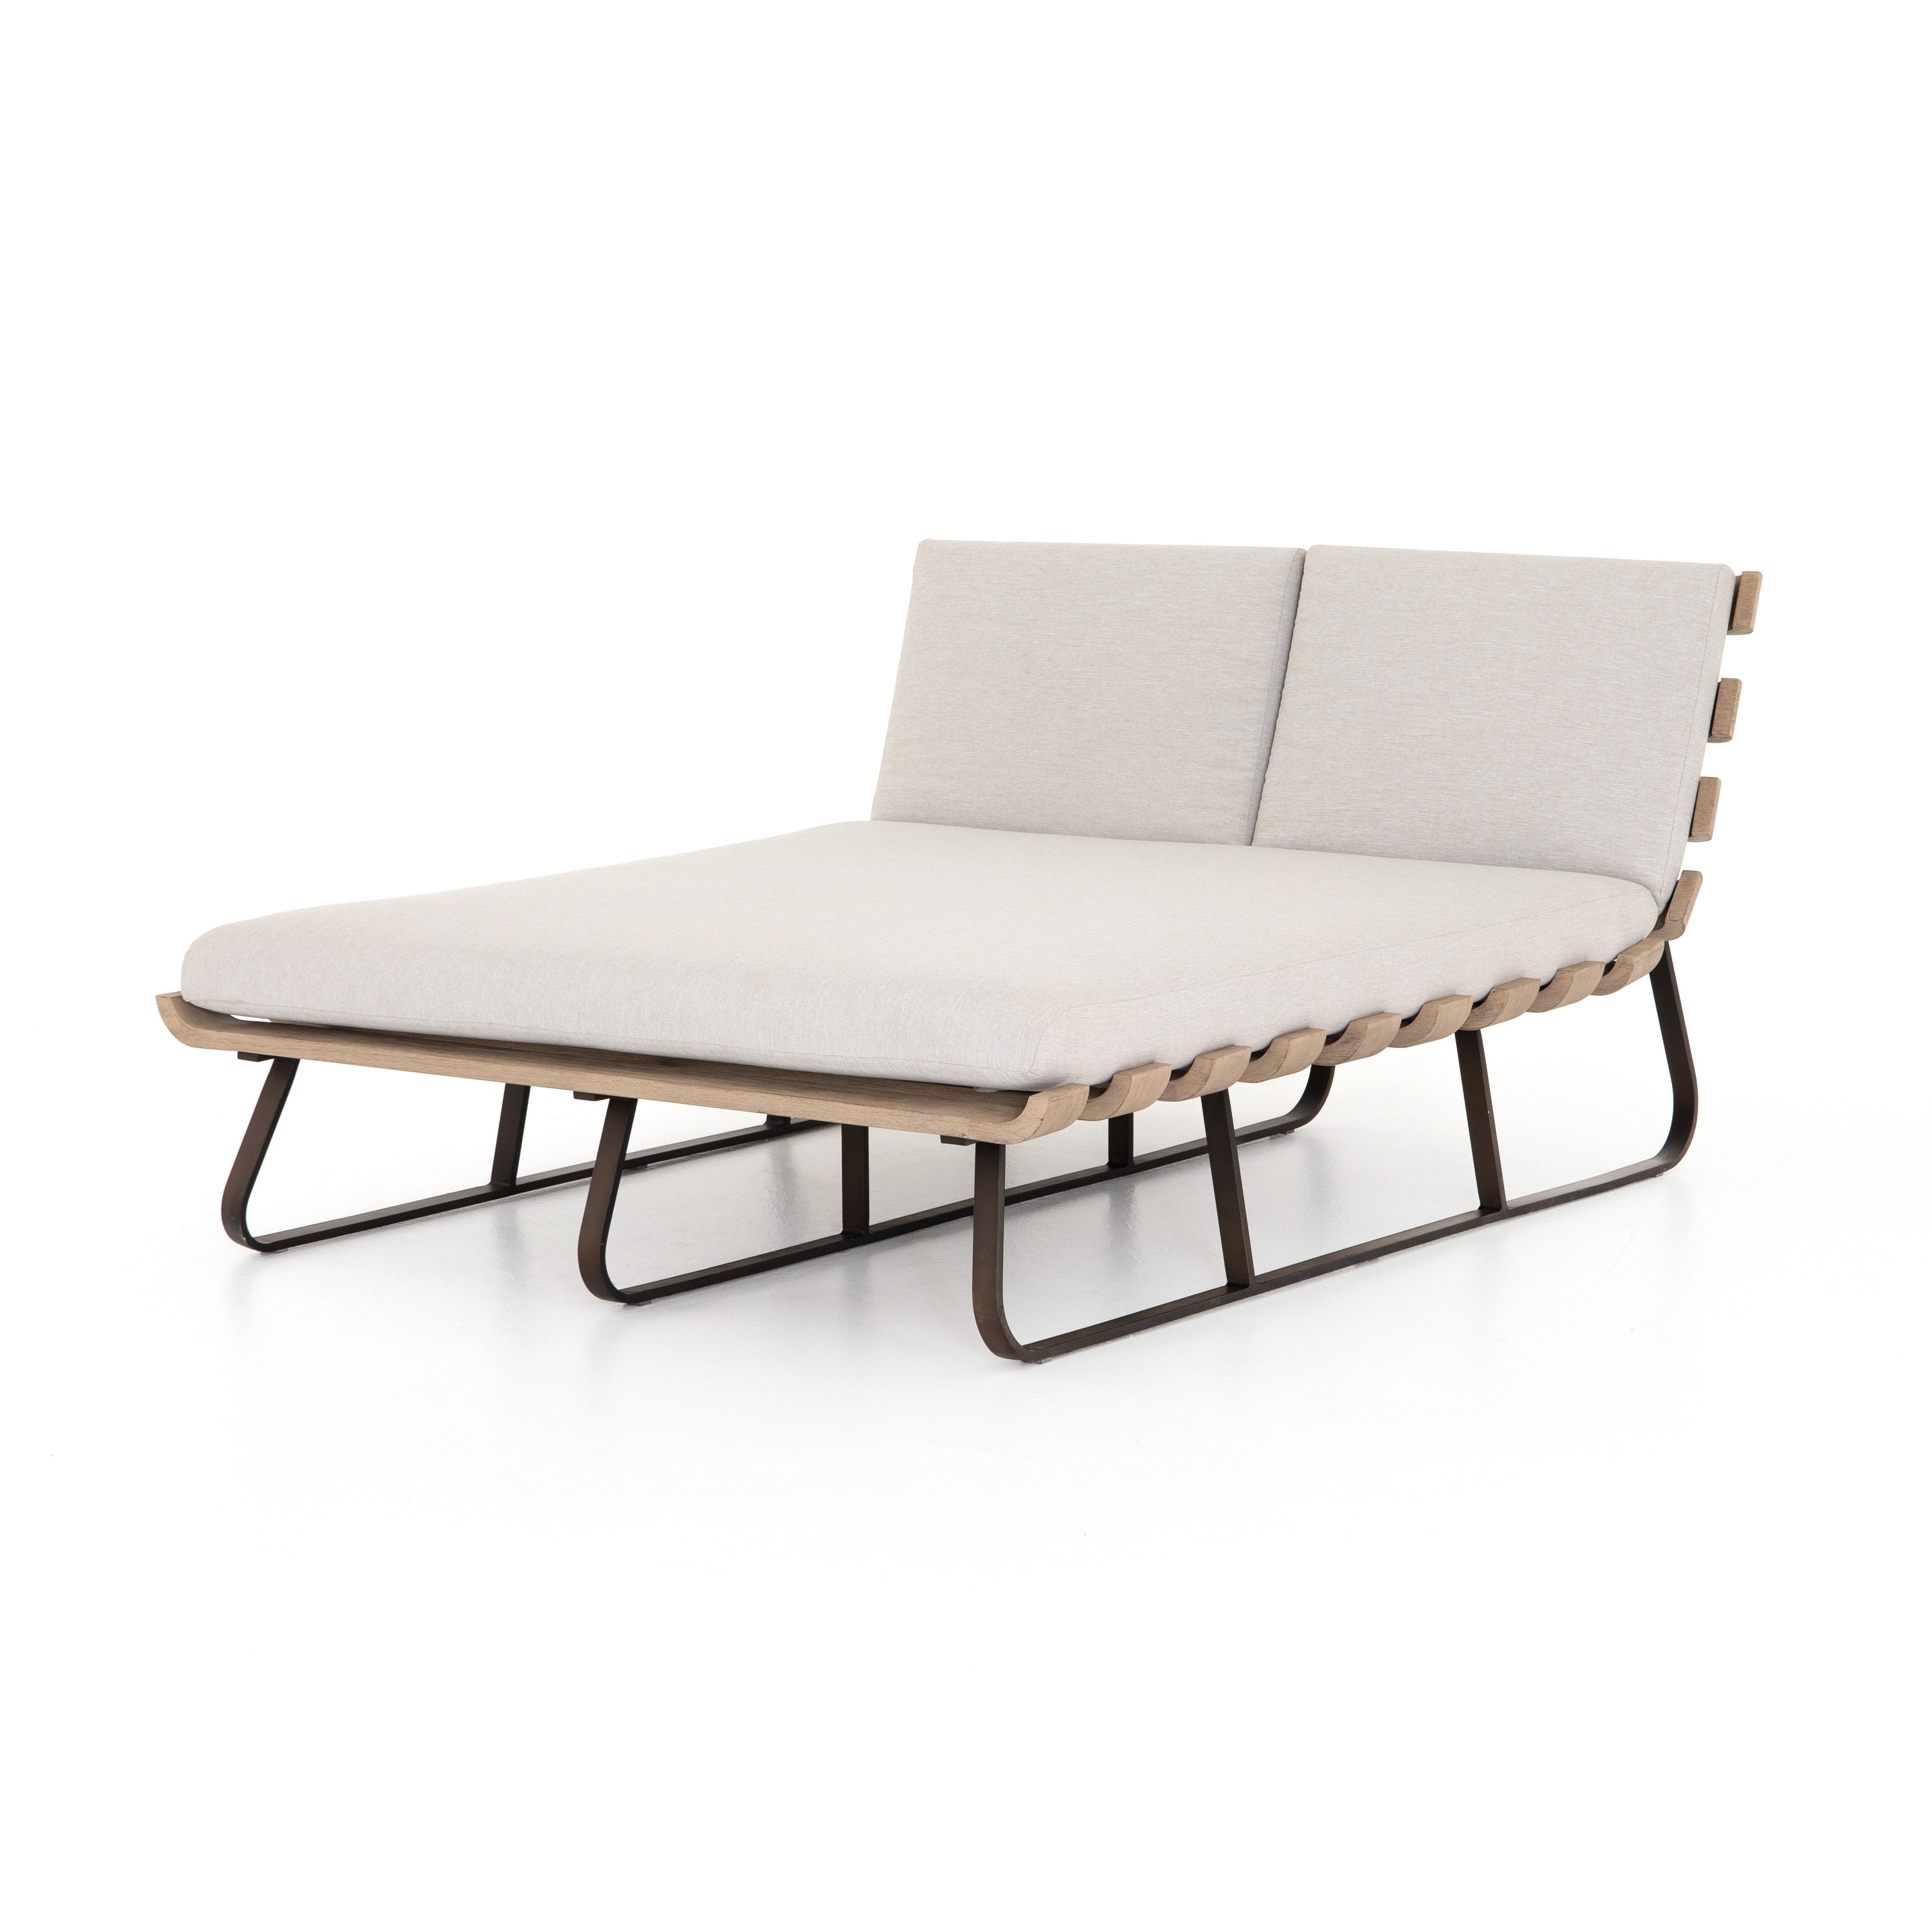 Dimitri Outdoor Double Chaise in Various Colors